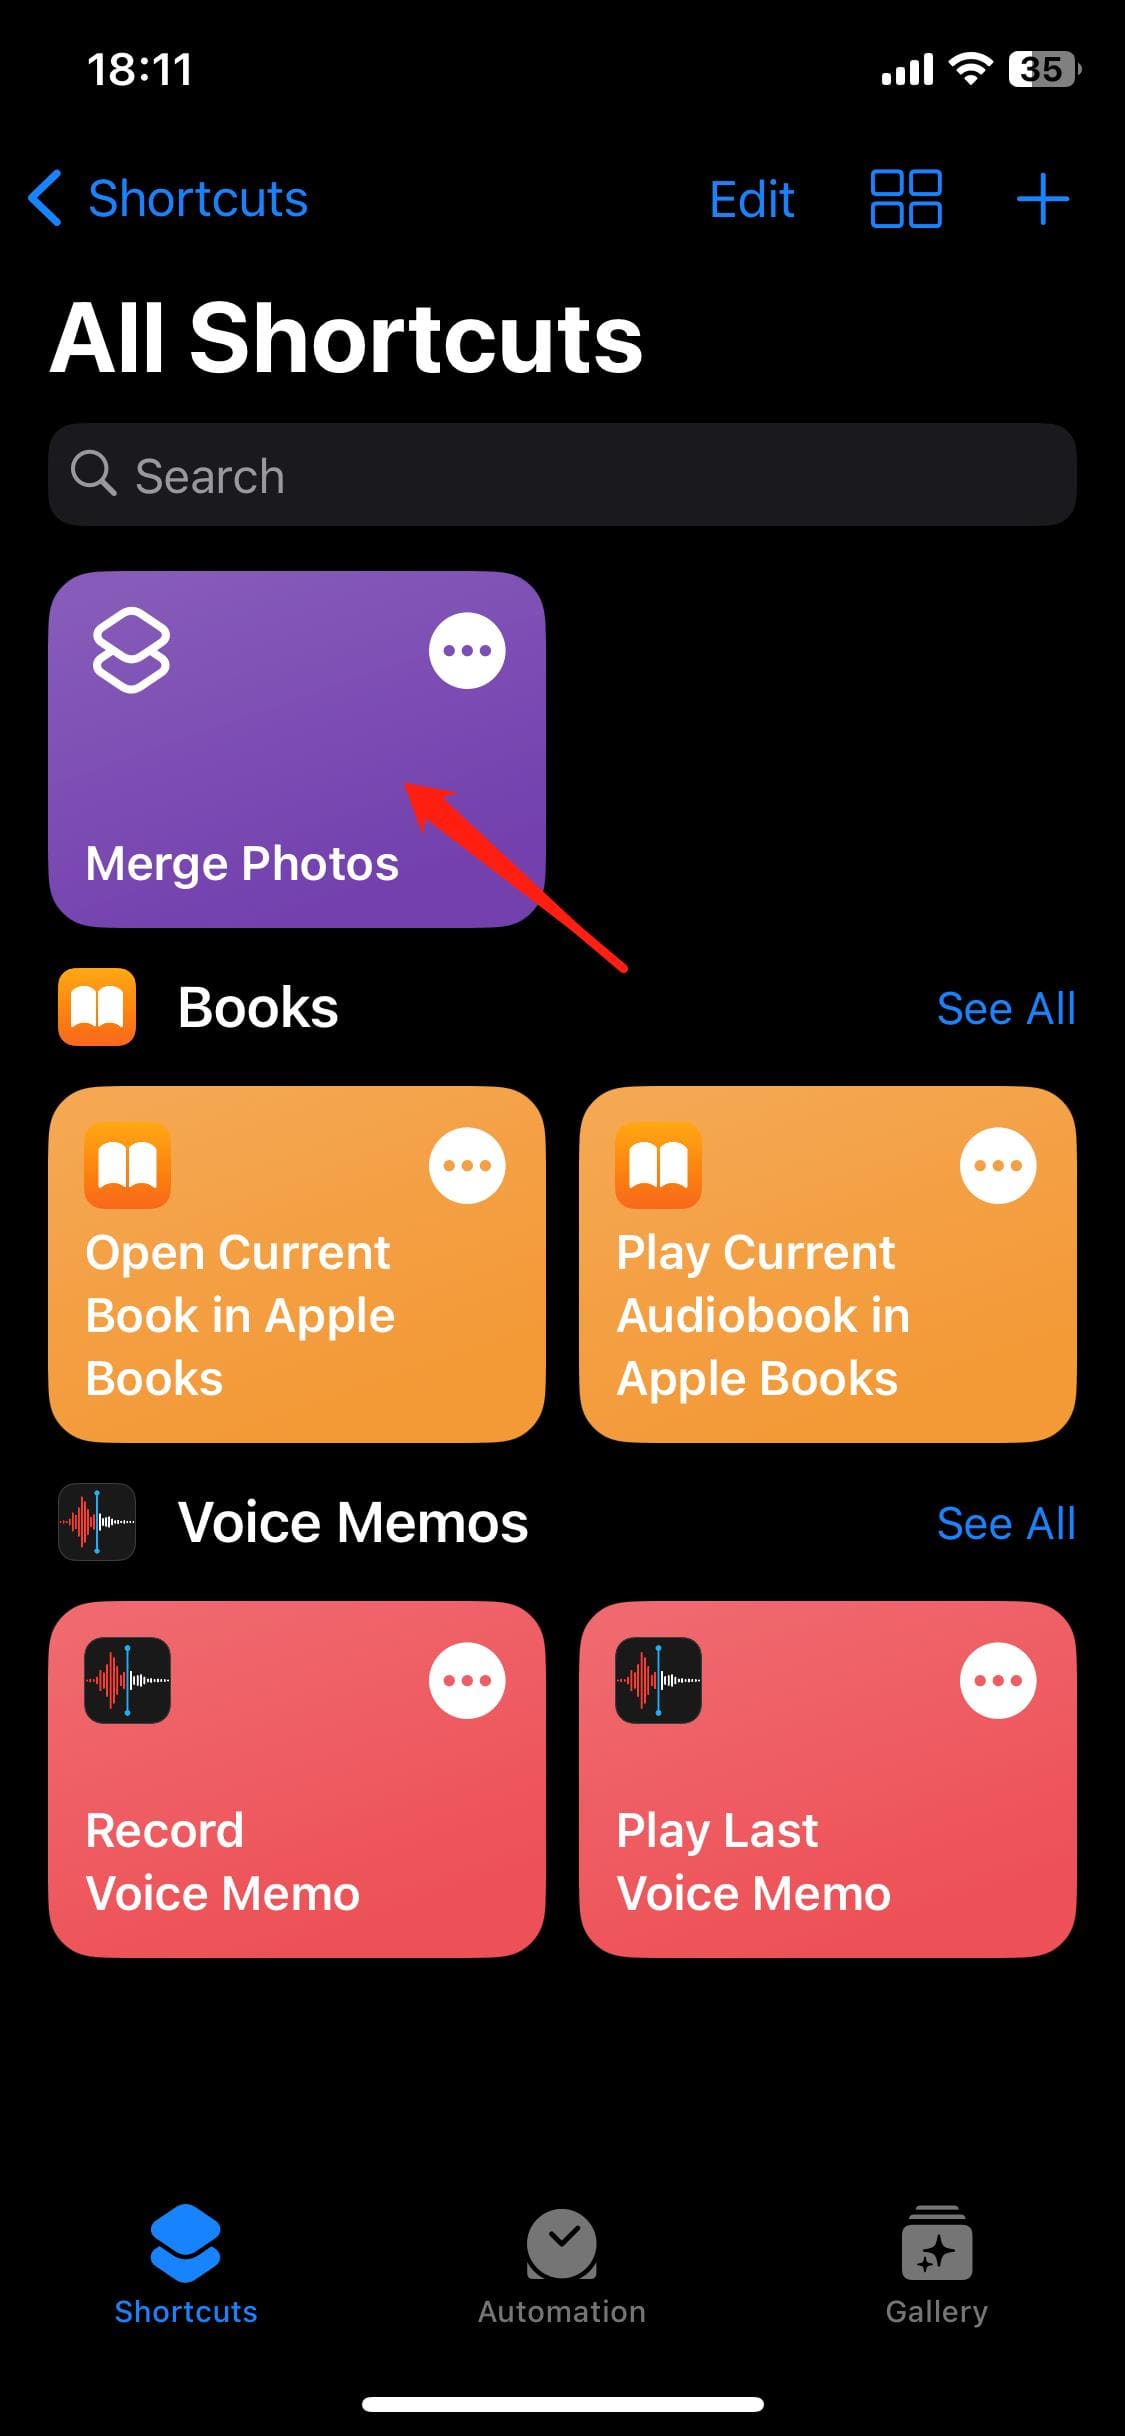 How to add two pictures together on iPhone